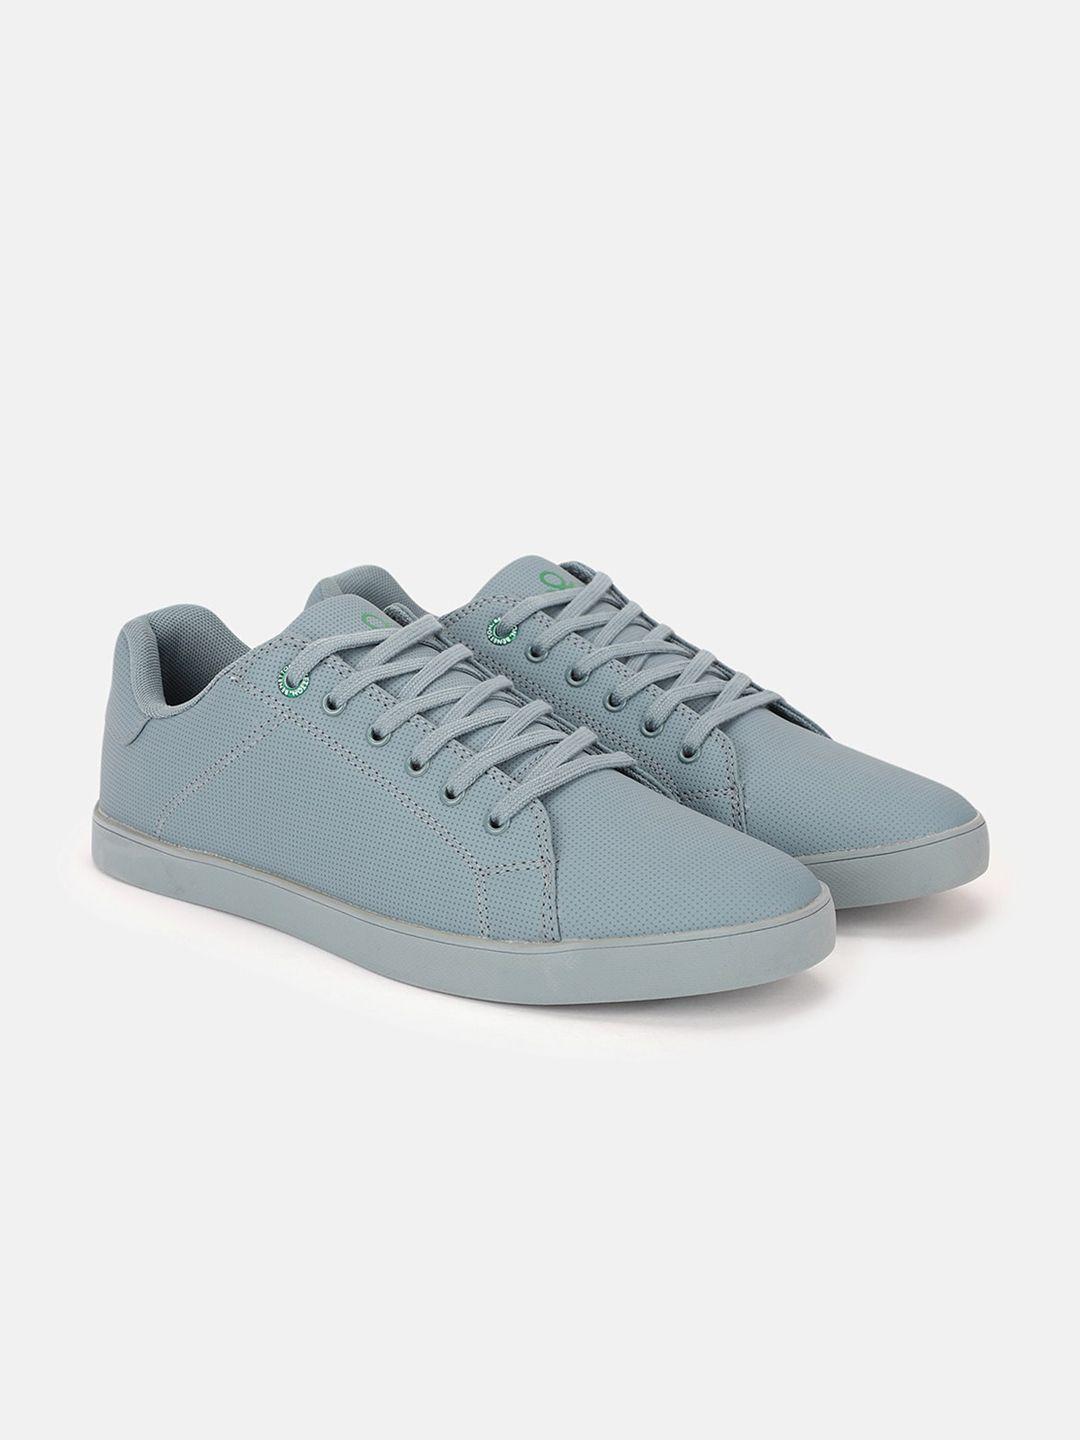 united colors of benetton men perforated lace-up sneakers